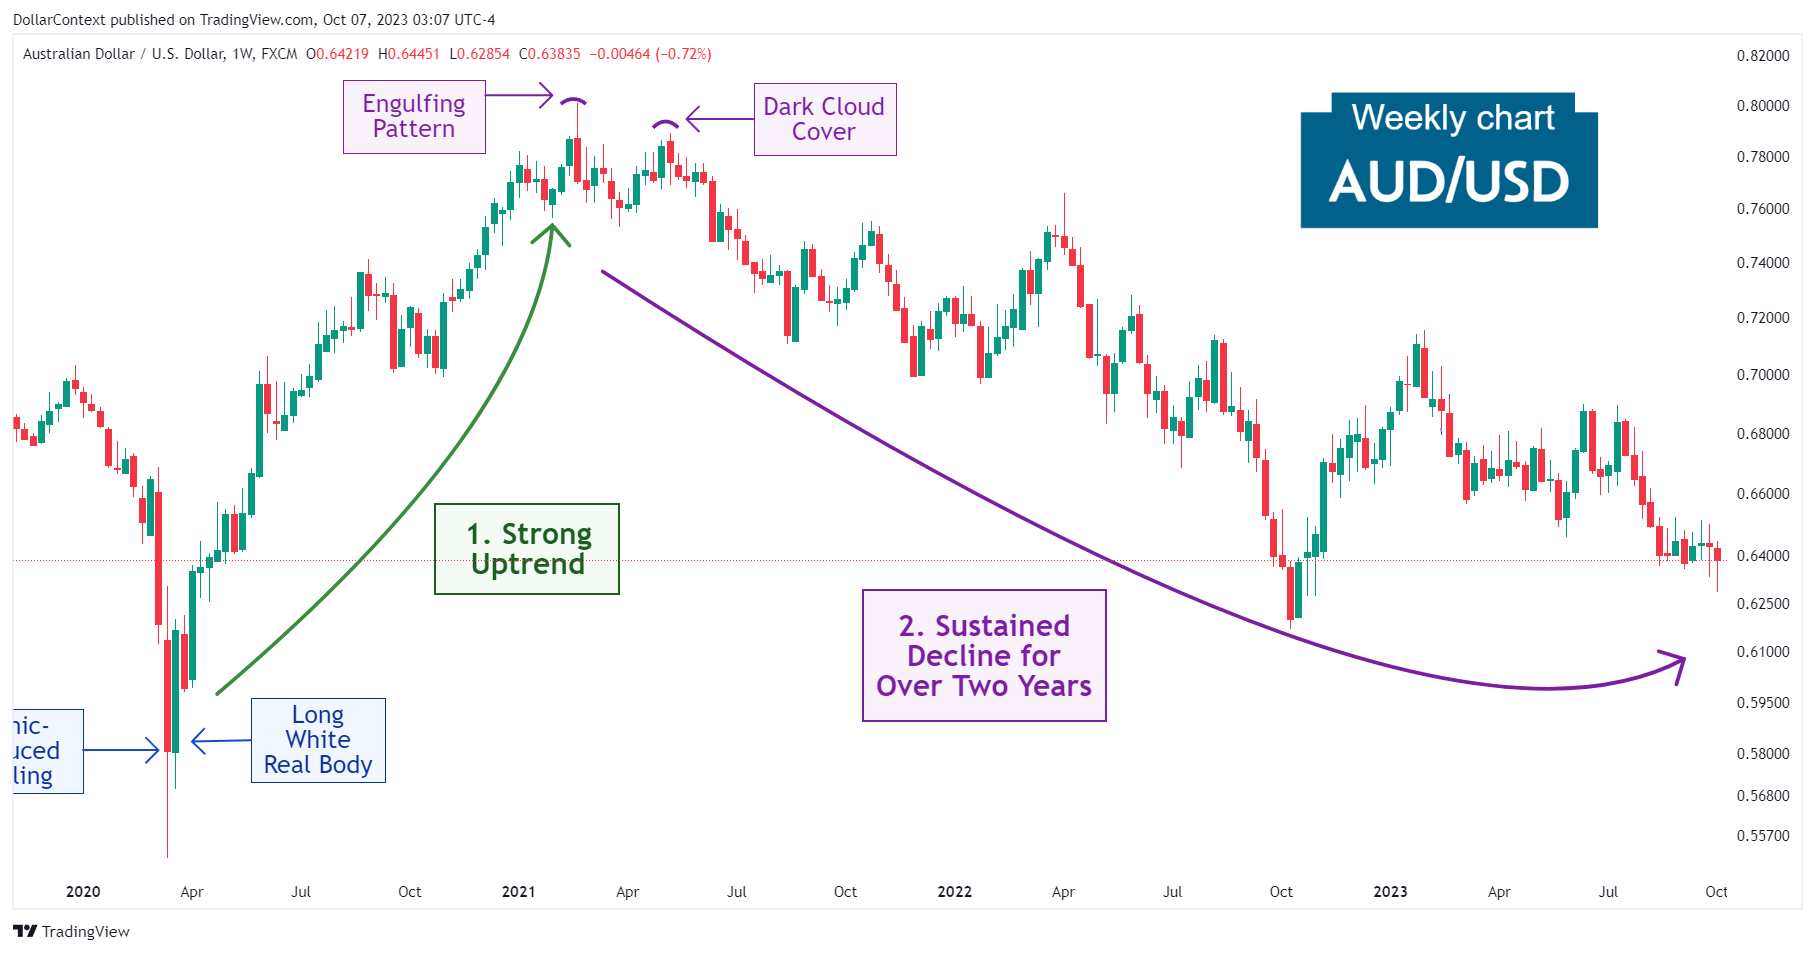 AUD/USD: The Top in Early 2021 and the Subsequent Decline (Weekly Chart)